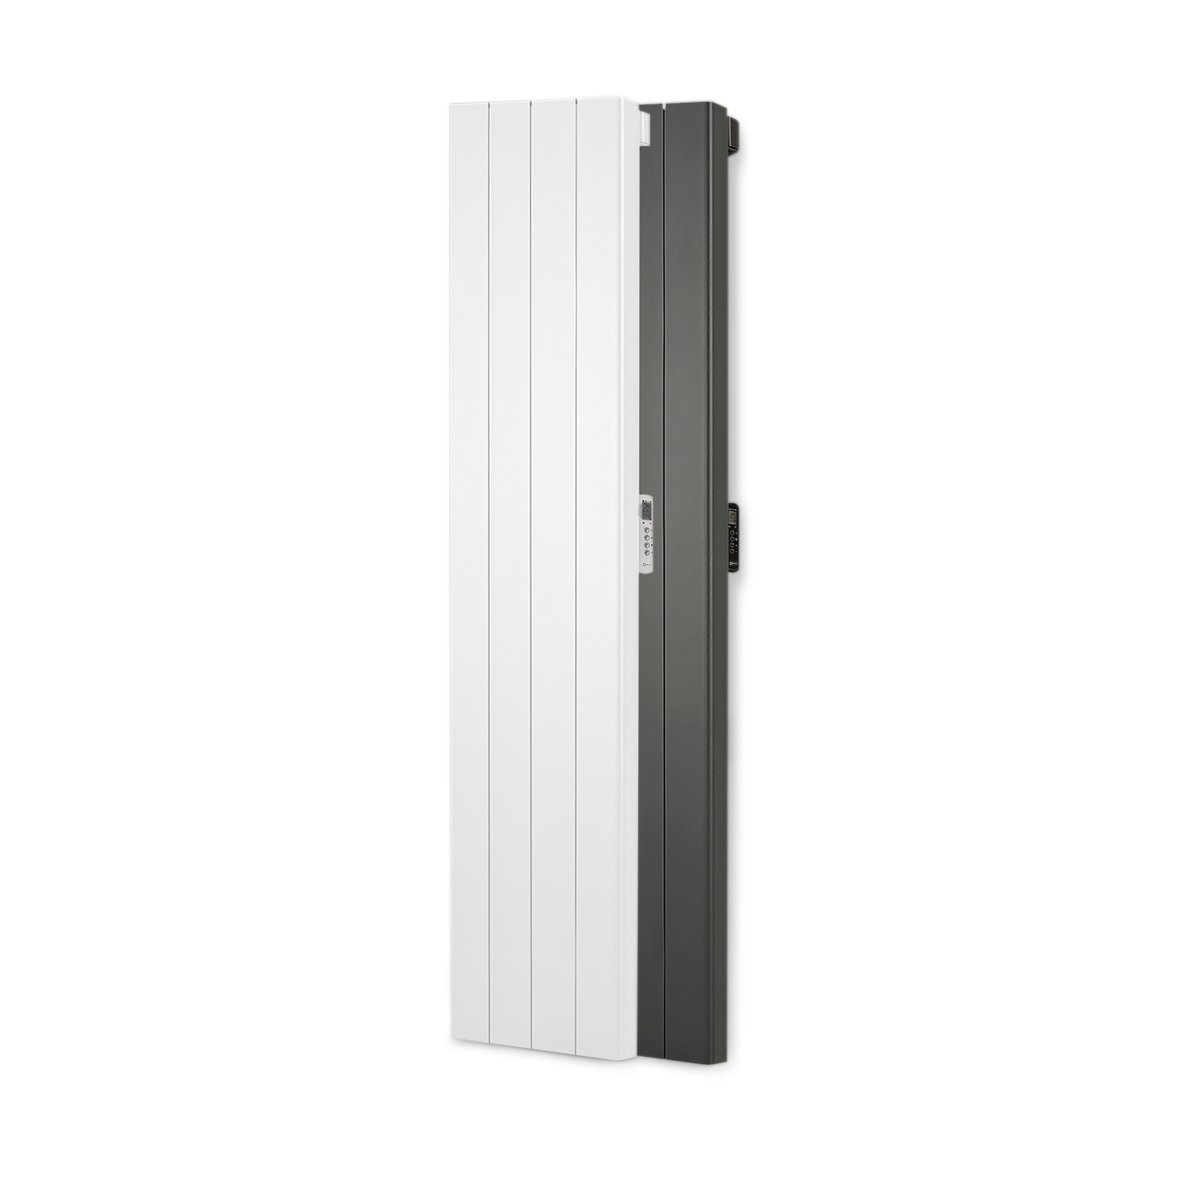 Rointe Palaos tall vertical radiators in white and black with 4 heating elements